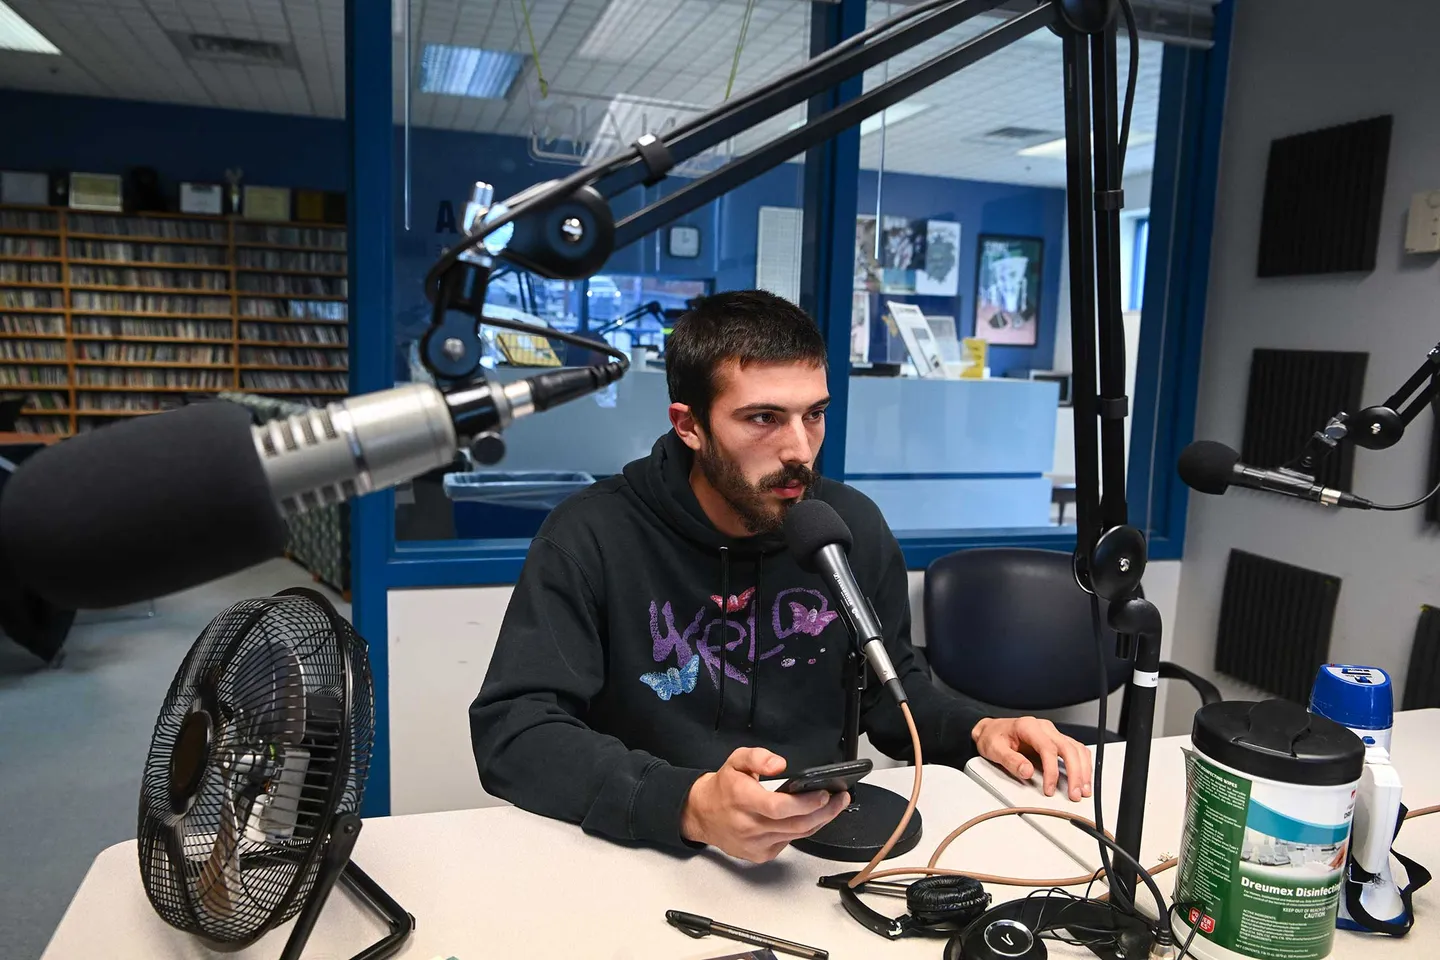 Toby Sherman reads an on-air update at the studios of U92 The Moose, the student-run radio station at WVU.